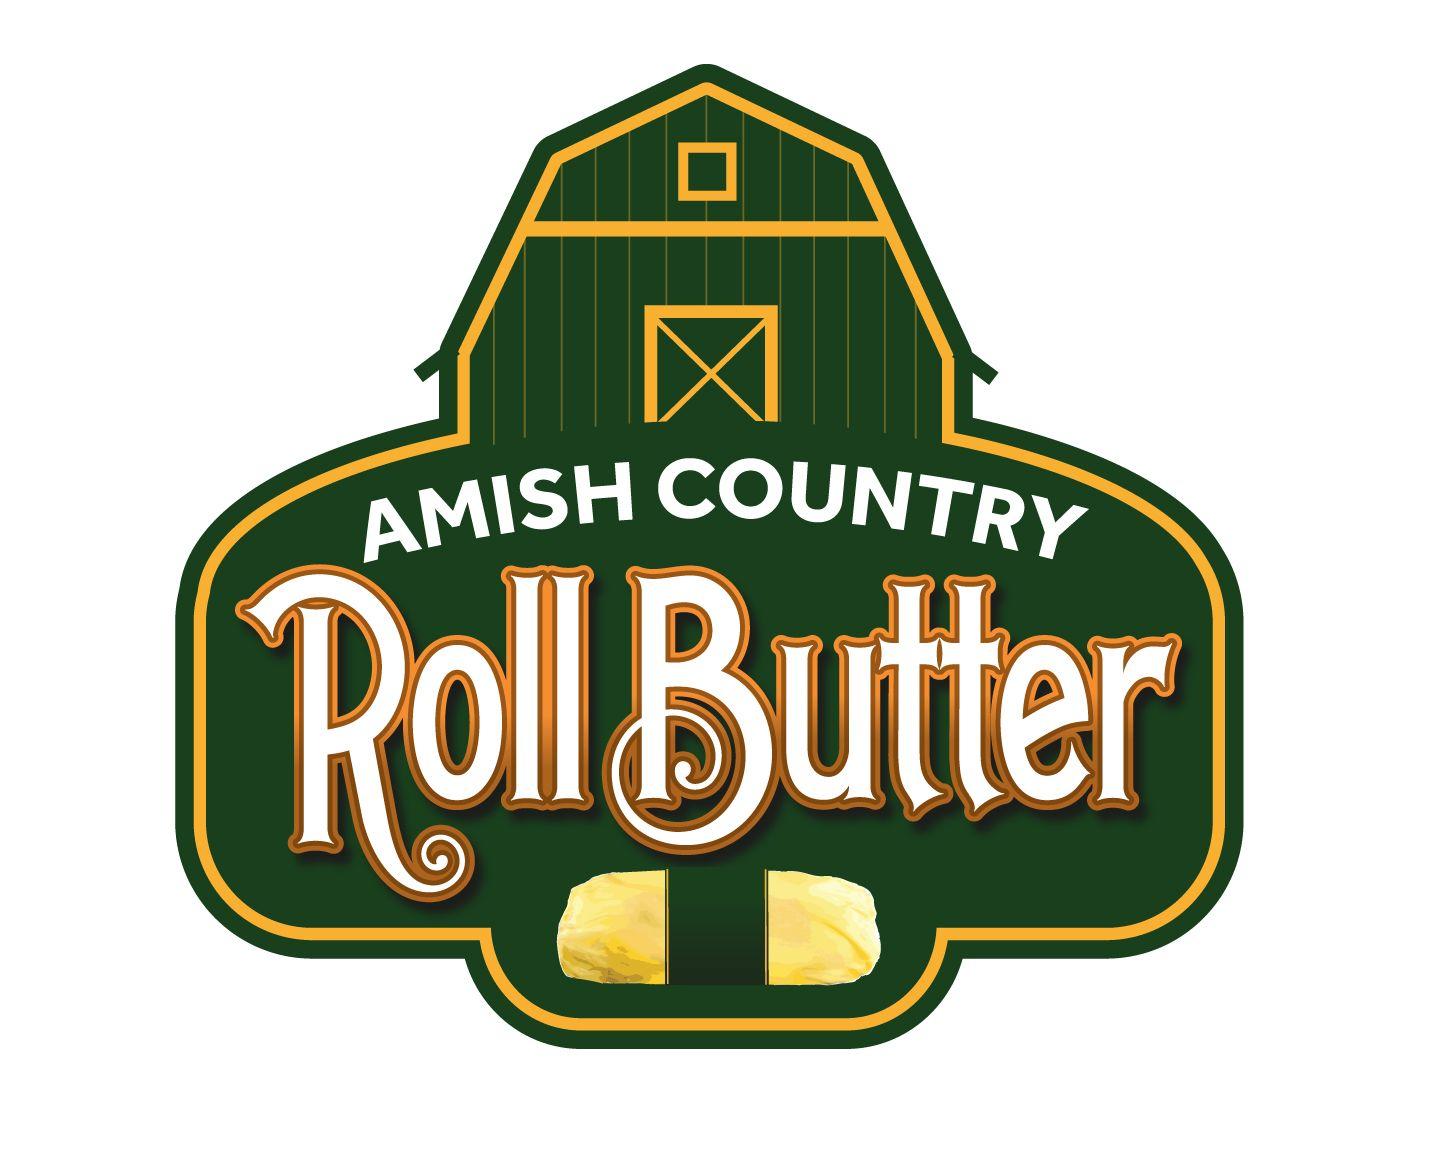 Amish Logo - Logo Design Contest for Amish Country Roll Butter | Hatchwise